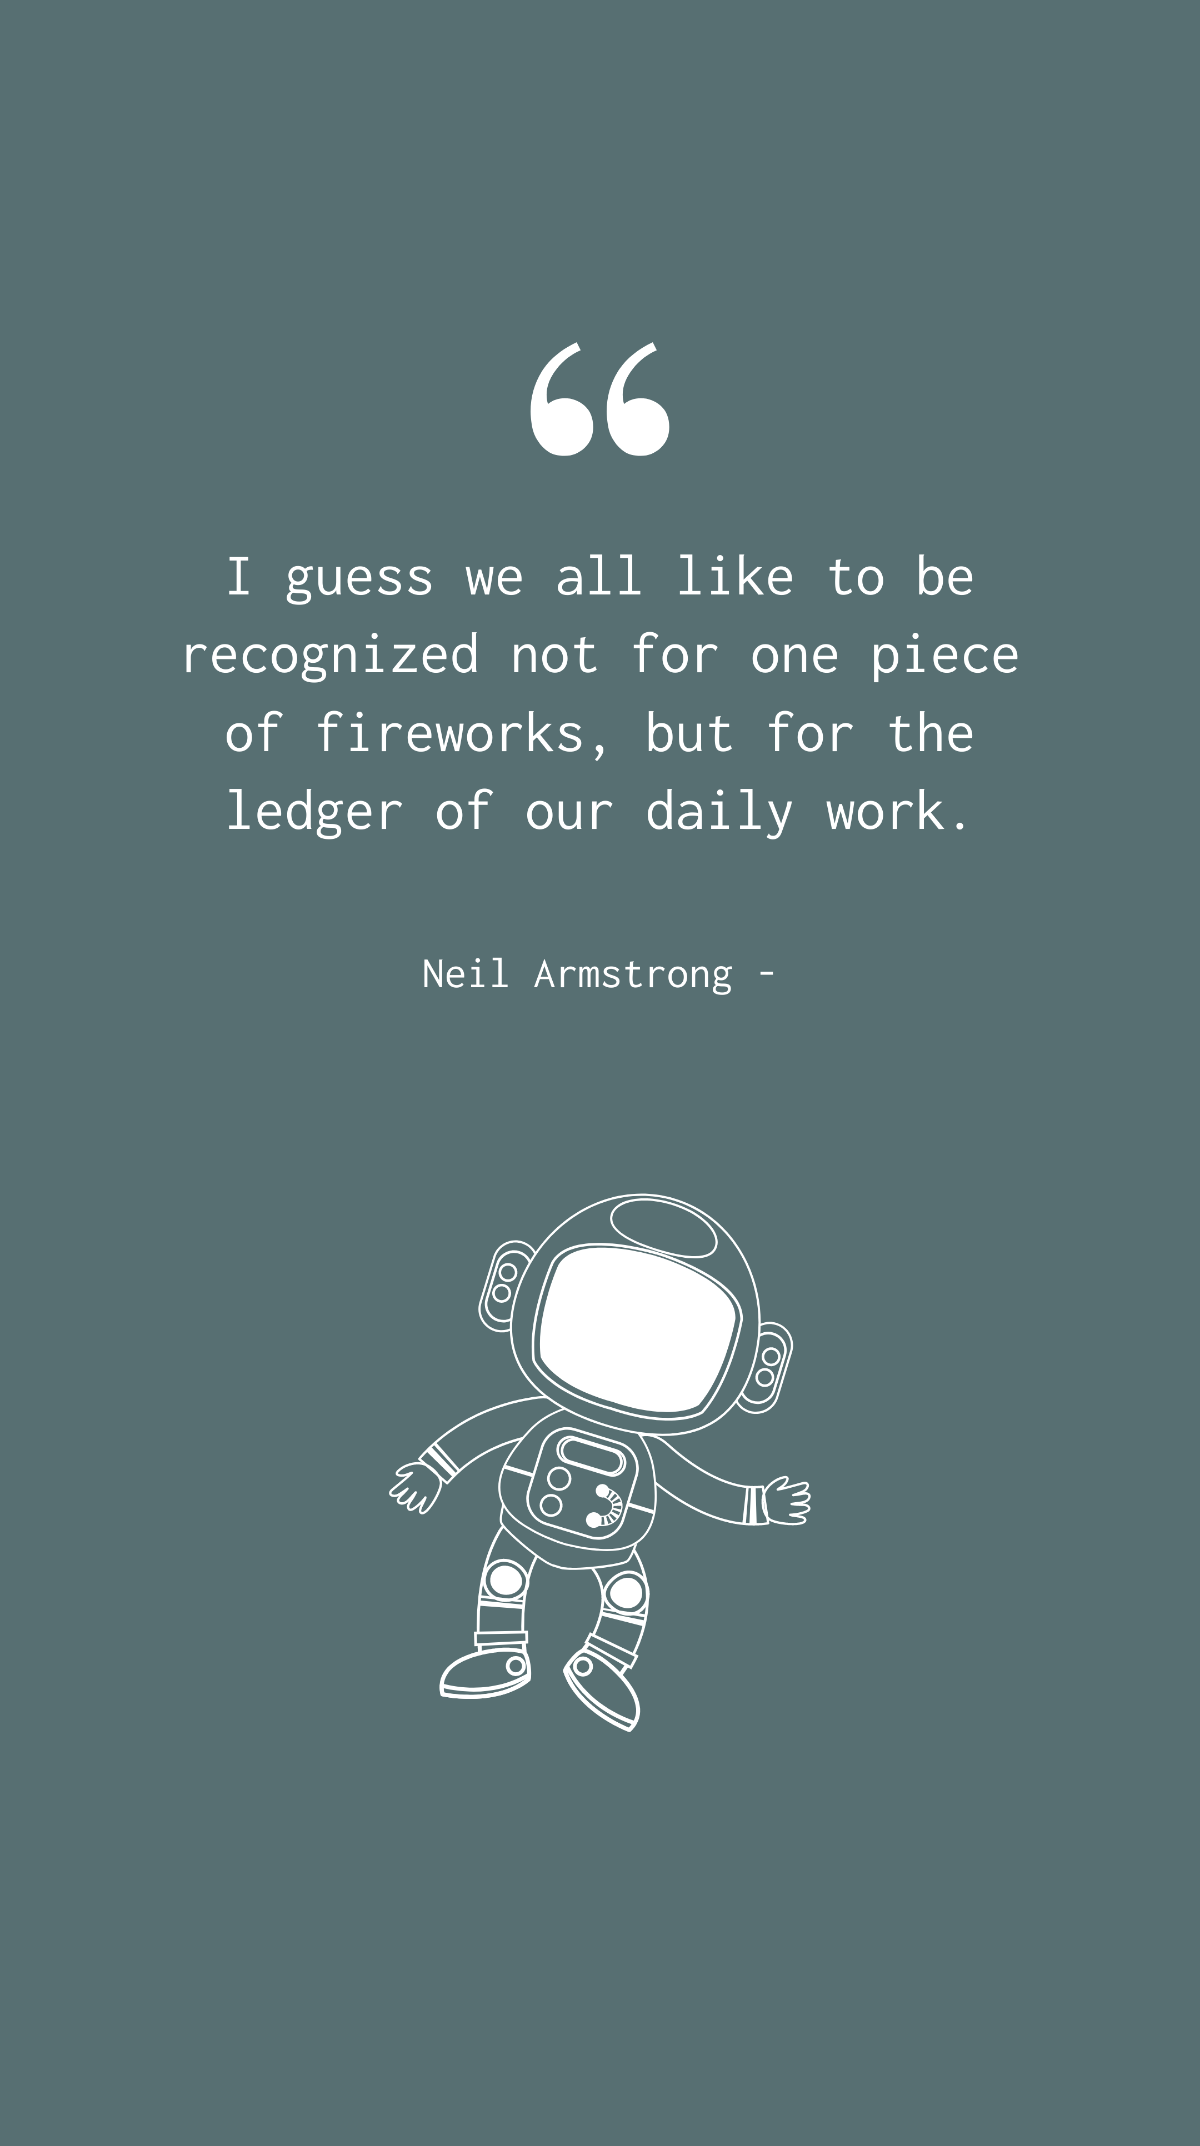 Free Neil Armstrong - I guess we all like to be recognized not for one piece of fireworks, but for the ledger of our daily work. Template